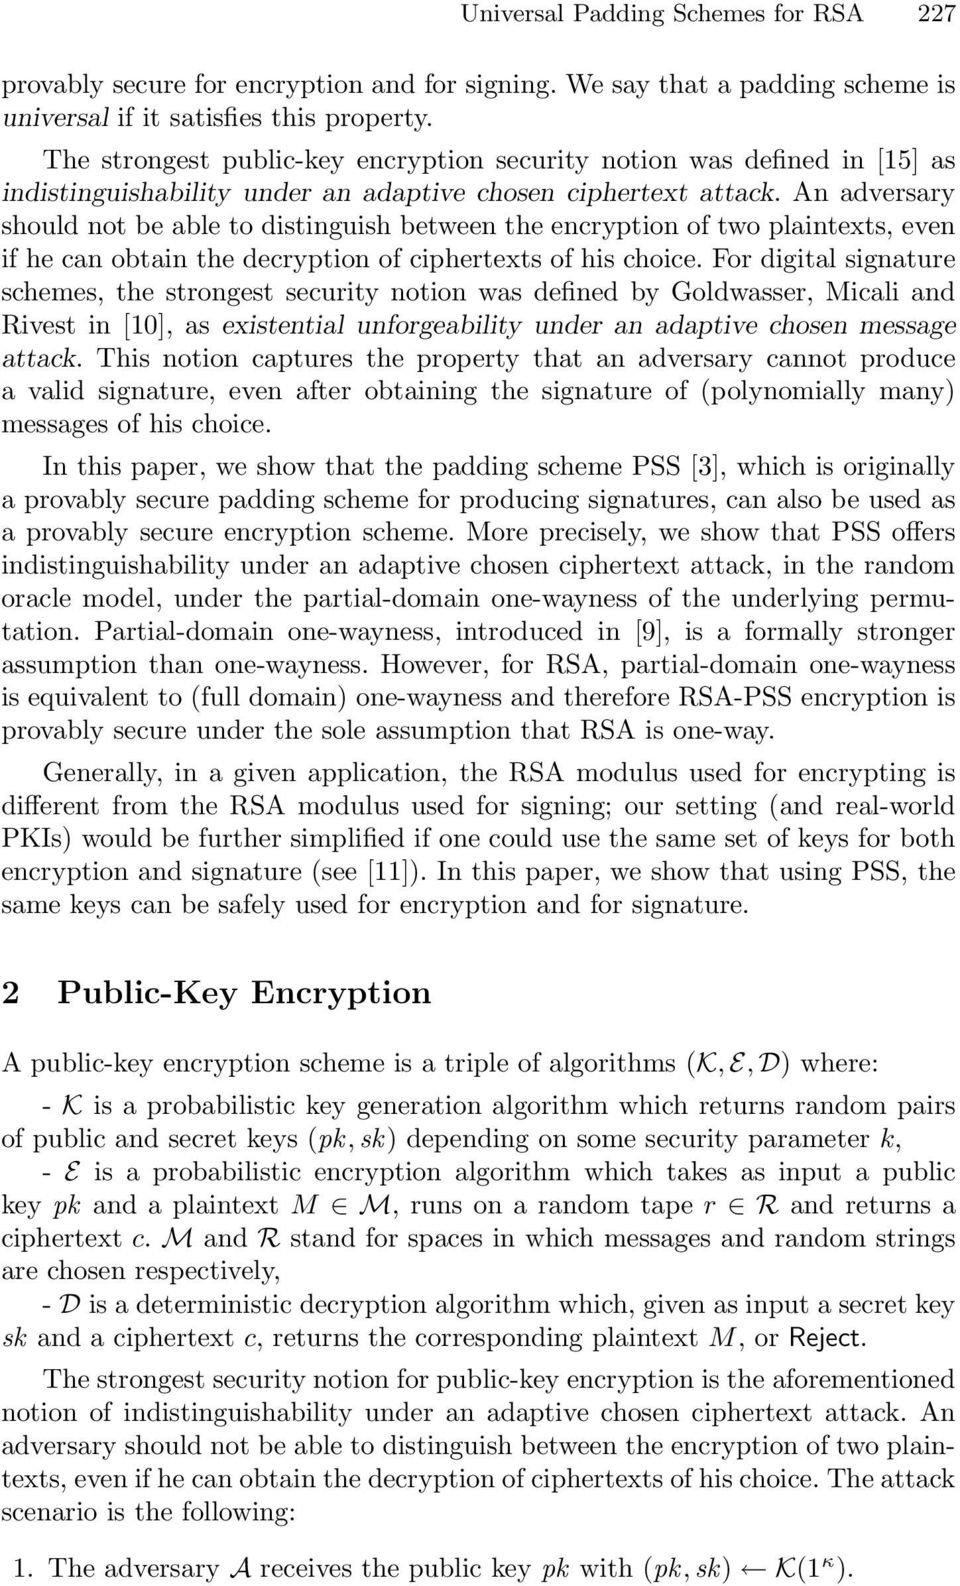 An adversary should not be able to distinguish between the encryption of two plaintexts, even if he can obtain the decryption of ciphertexts of his choice.